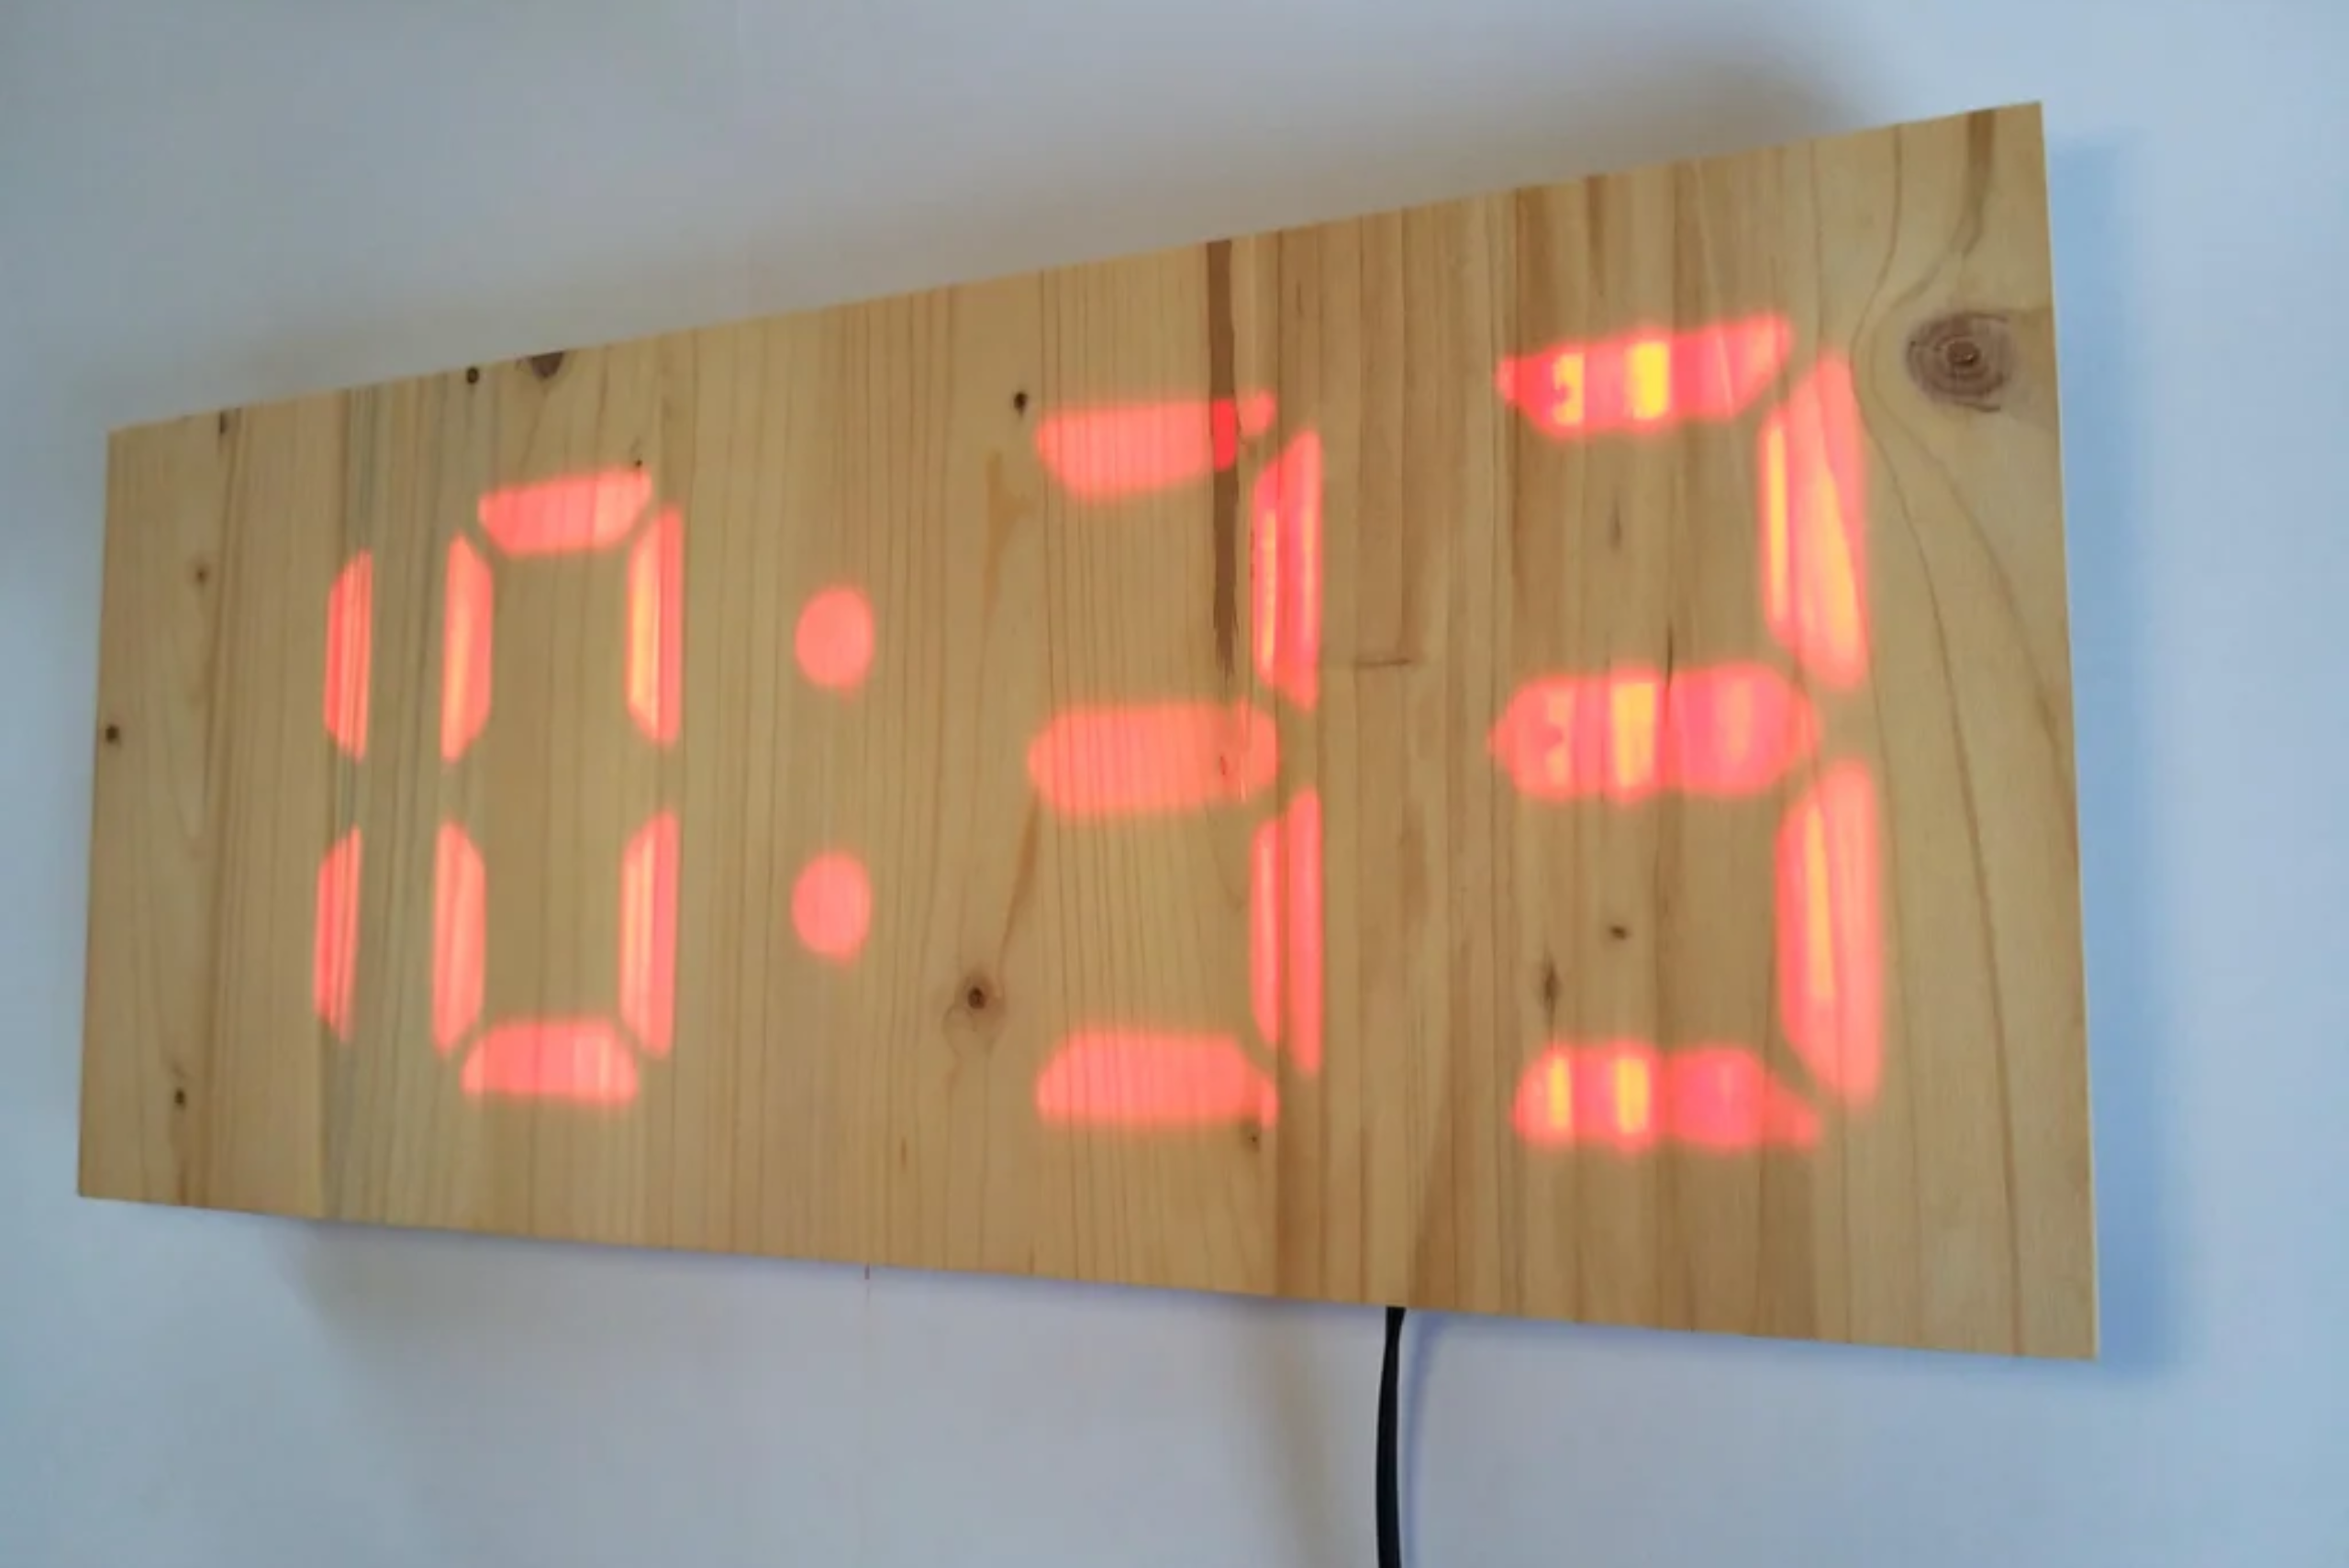 A digital clock displaying on a wooden board.